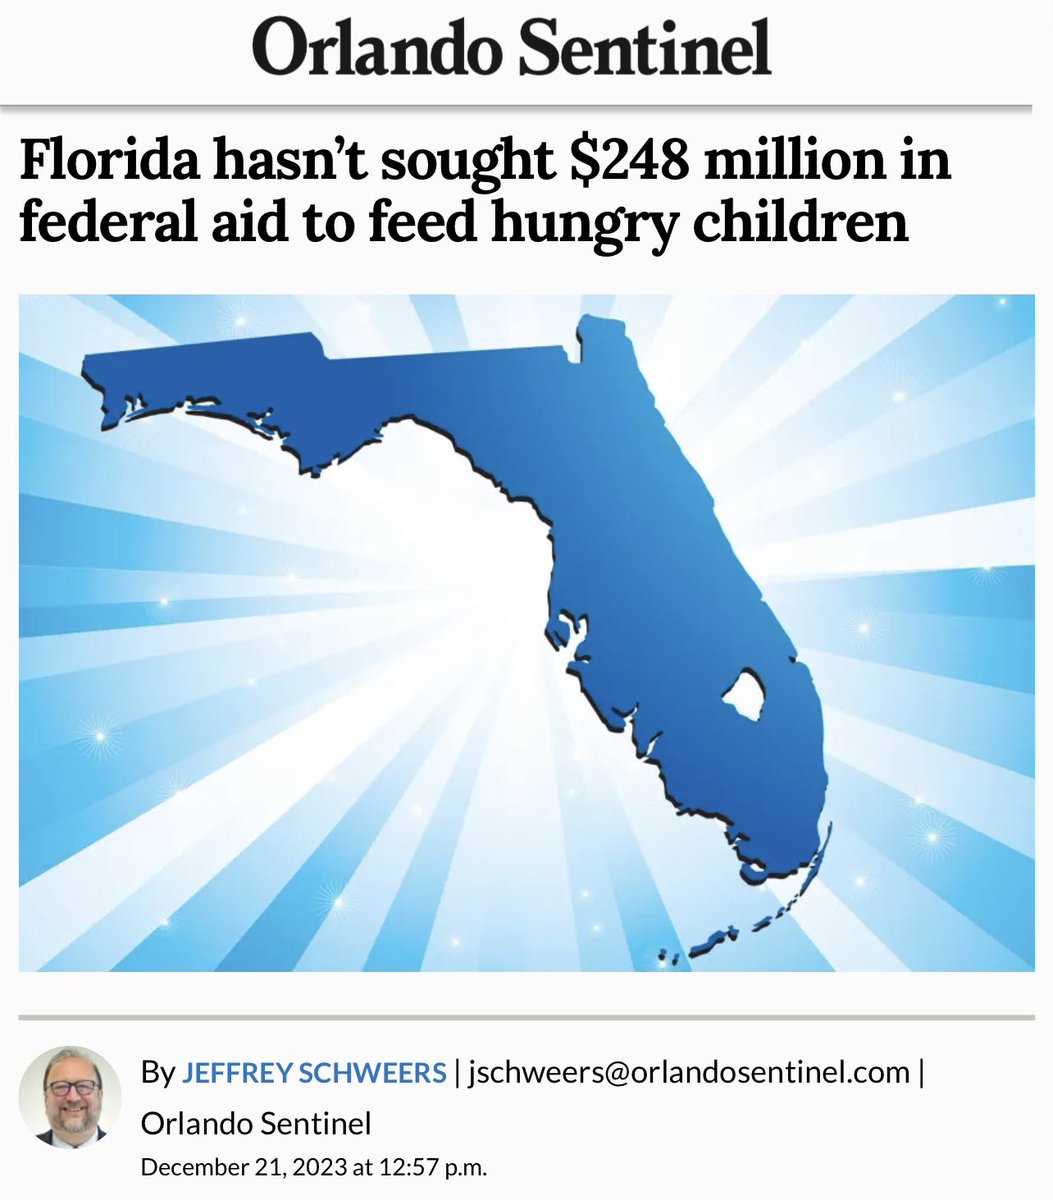 I have fond memories of going to the local public school for summer meals when my mother was too busy or didn't have enough $$ Shame on Ron DeSantis and his Administration for rejecting federal funds to feed kids.